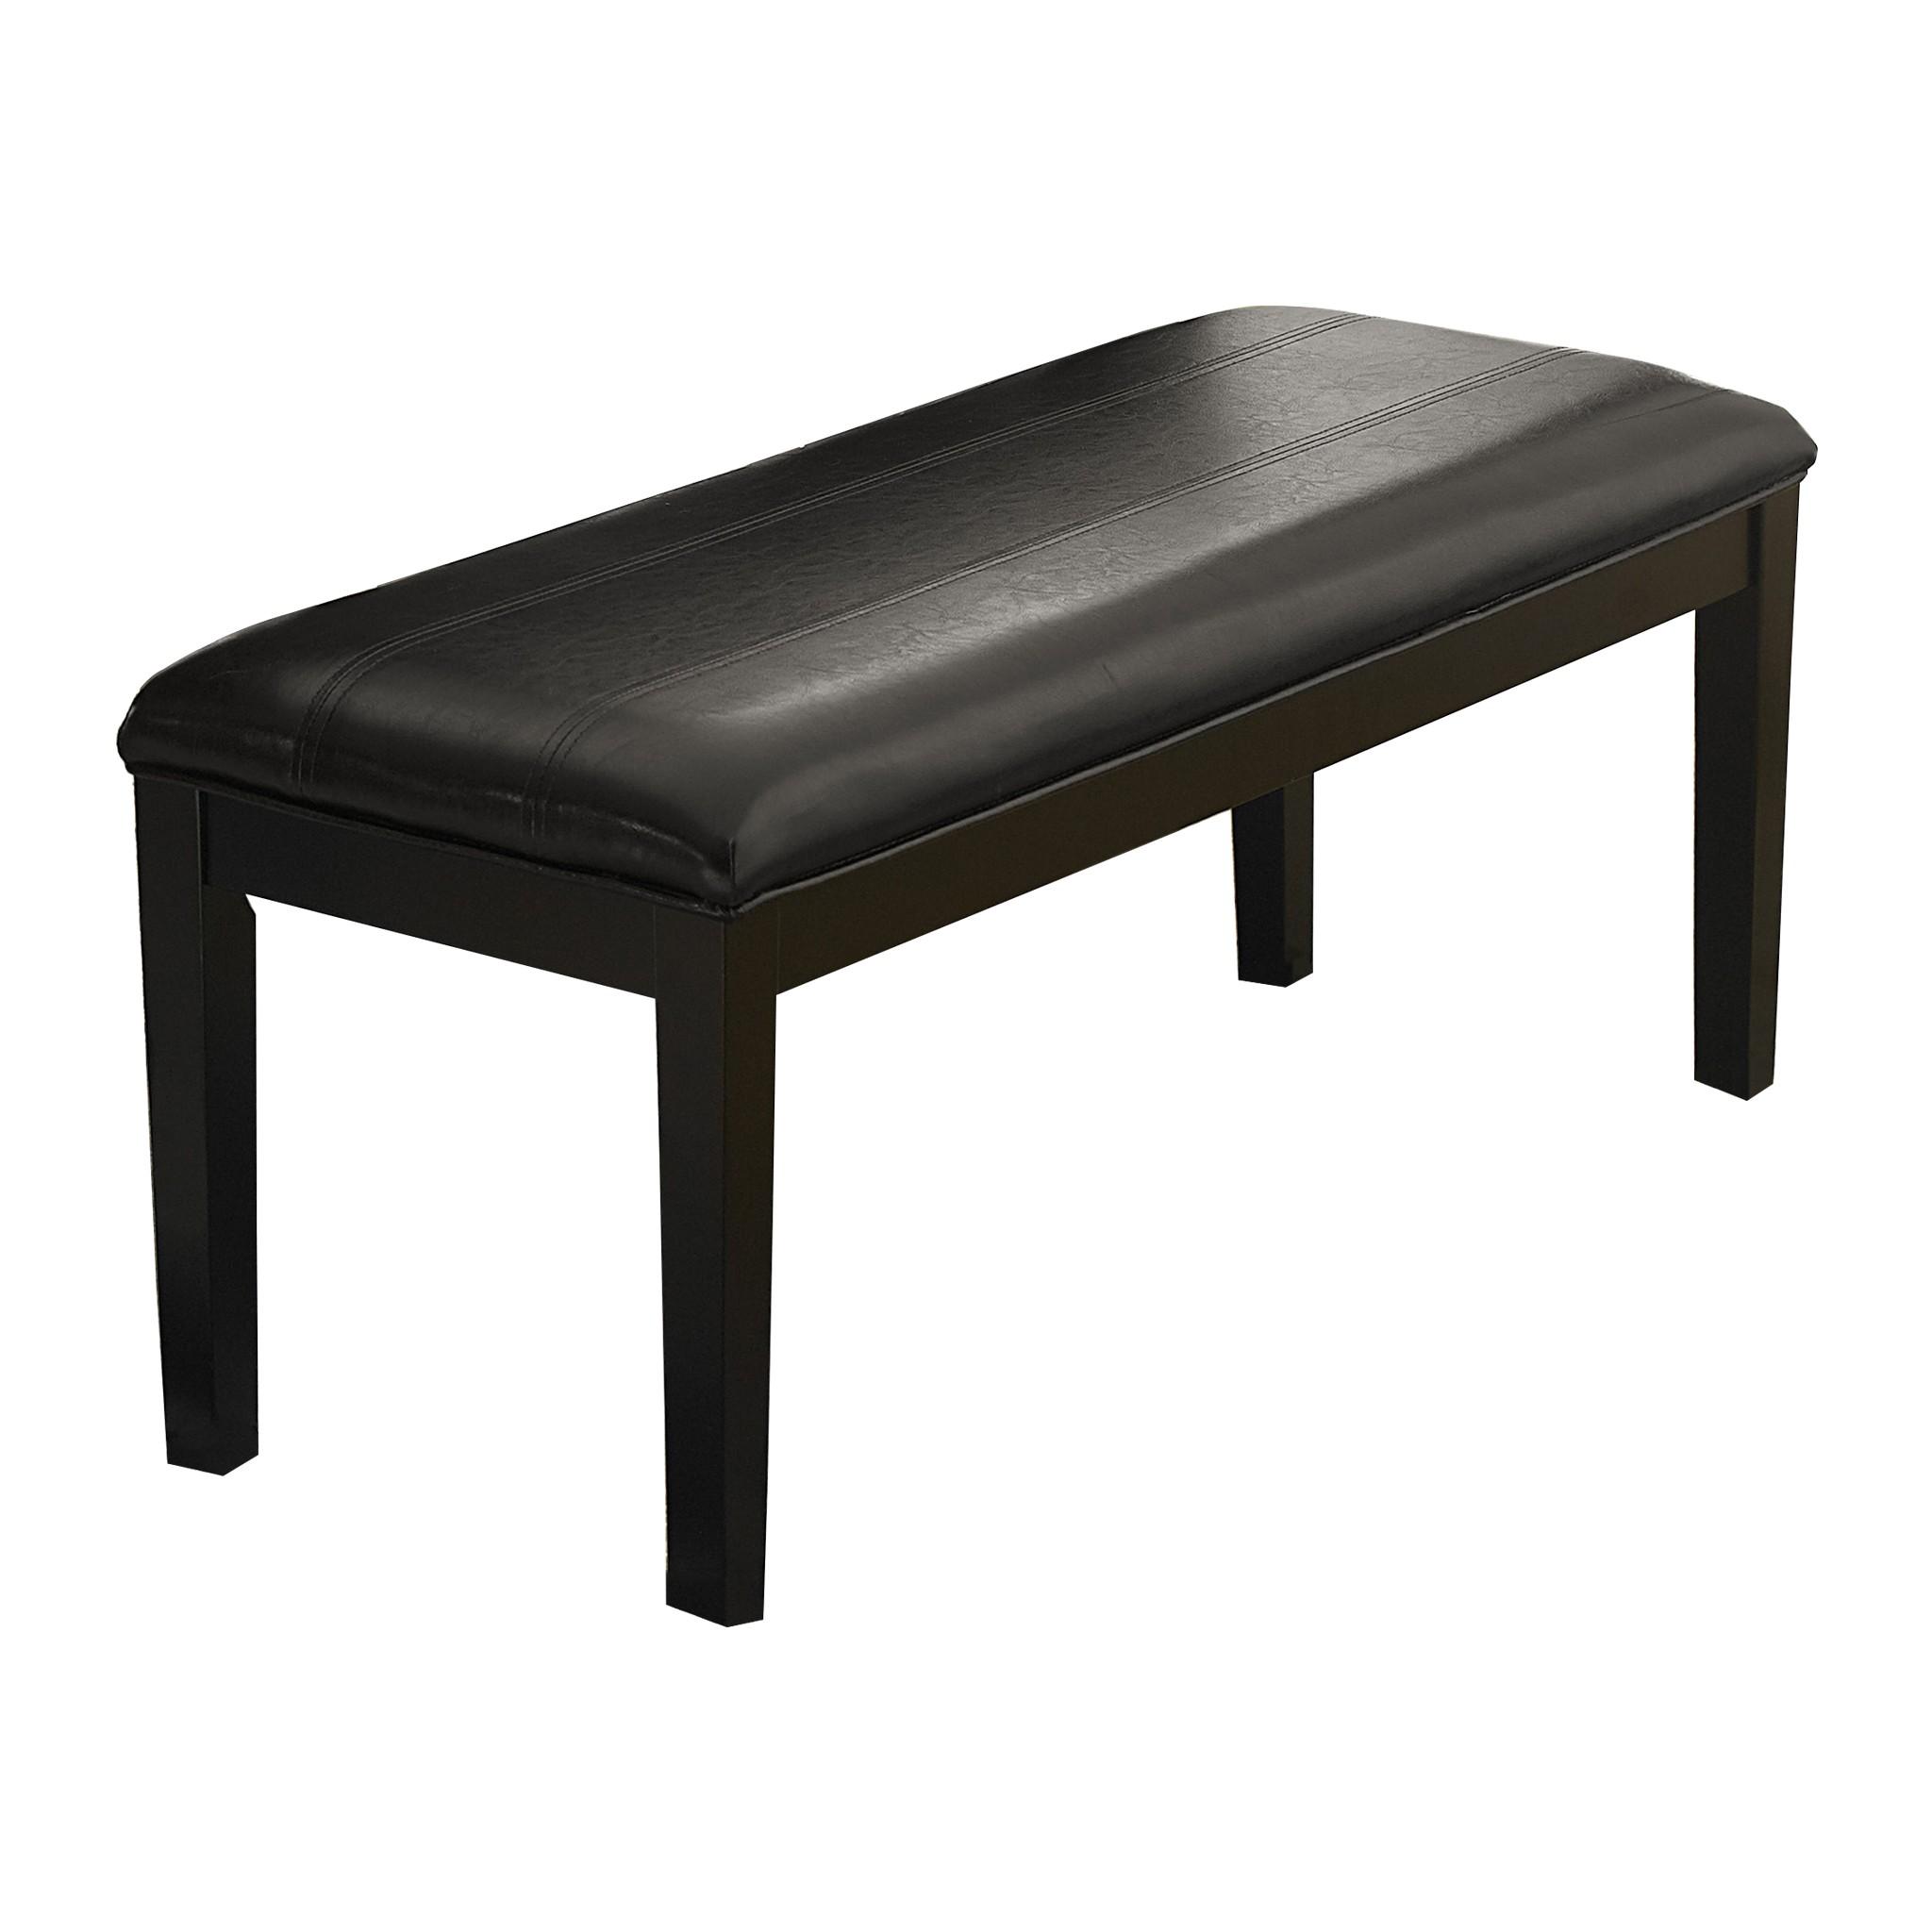 Transitional Bench 5070-13 Cristo 5070-13 in Espresso Faux Leather